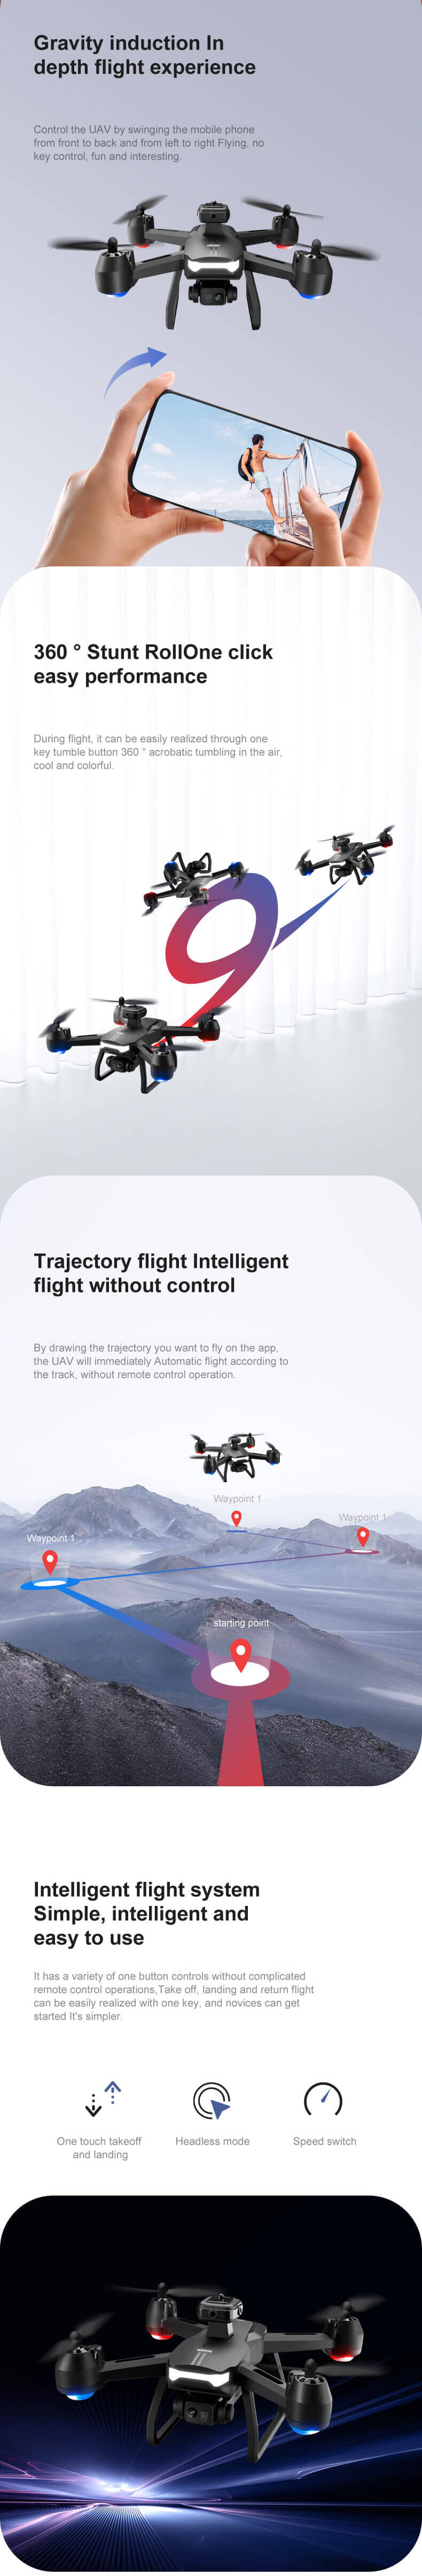 4DRC V29 obstacle avoidance UAV with HD dual cameras, support wifi image transmission, remote control can adjust camera Angle, optical flow positioning hover, easy flight operation, equipped with 2 batteries, suitable for adult UAV toy gift.